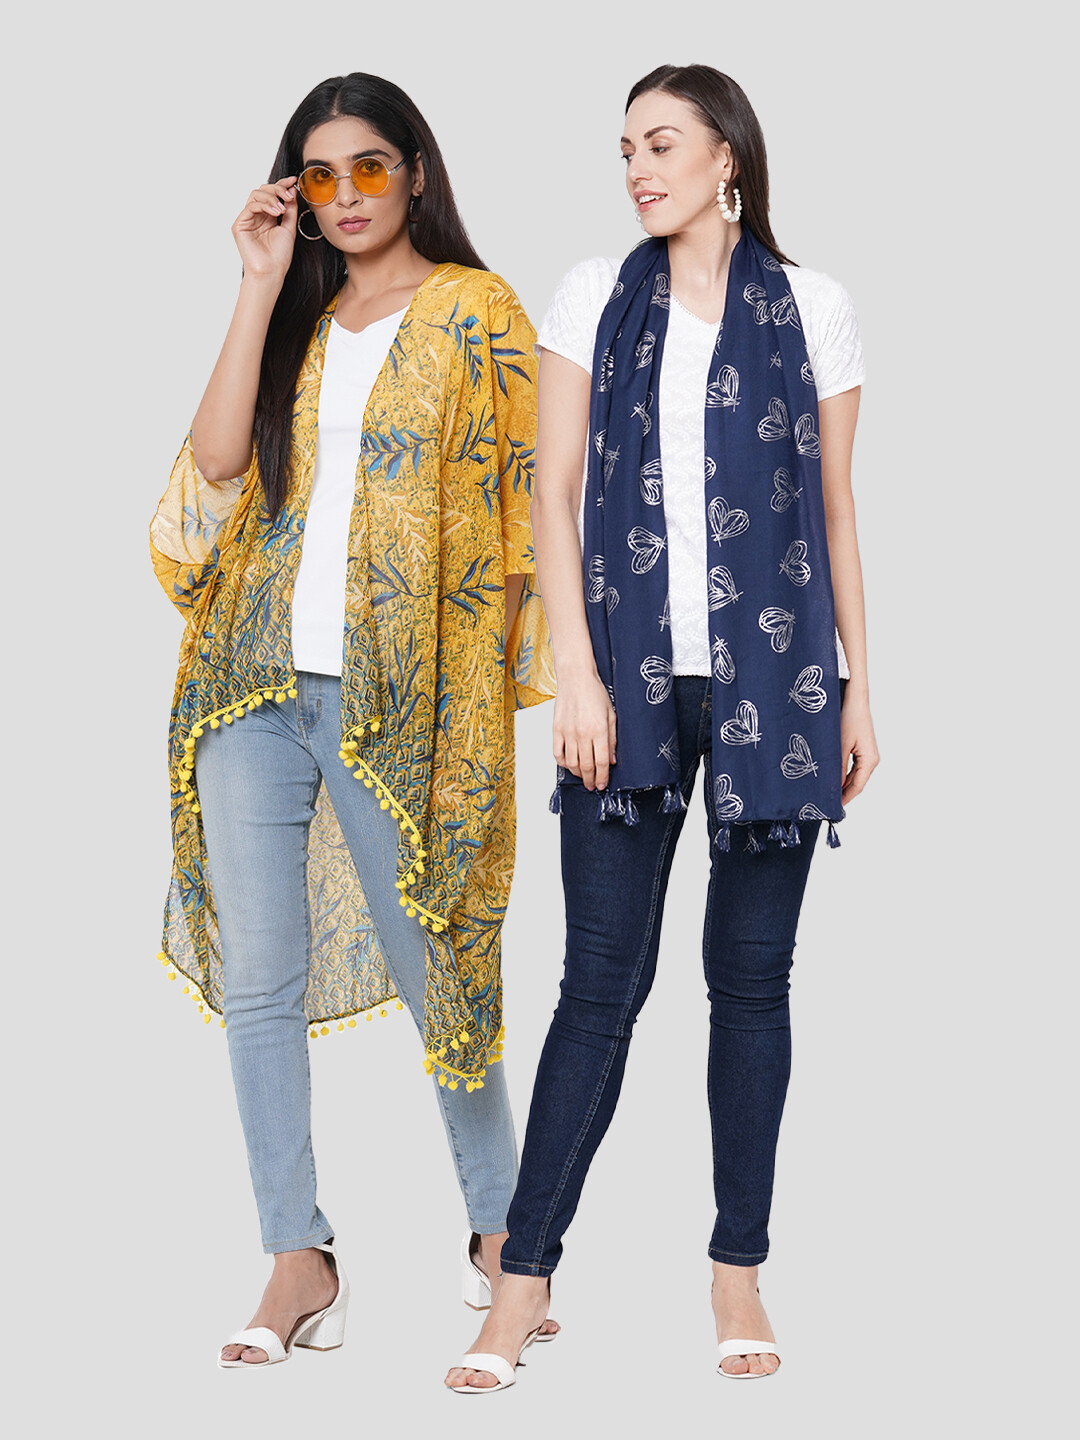 Stylist Printed Ponchos & Foil Printed Scarf with Tassels- Combo offer